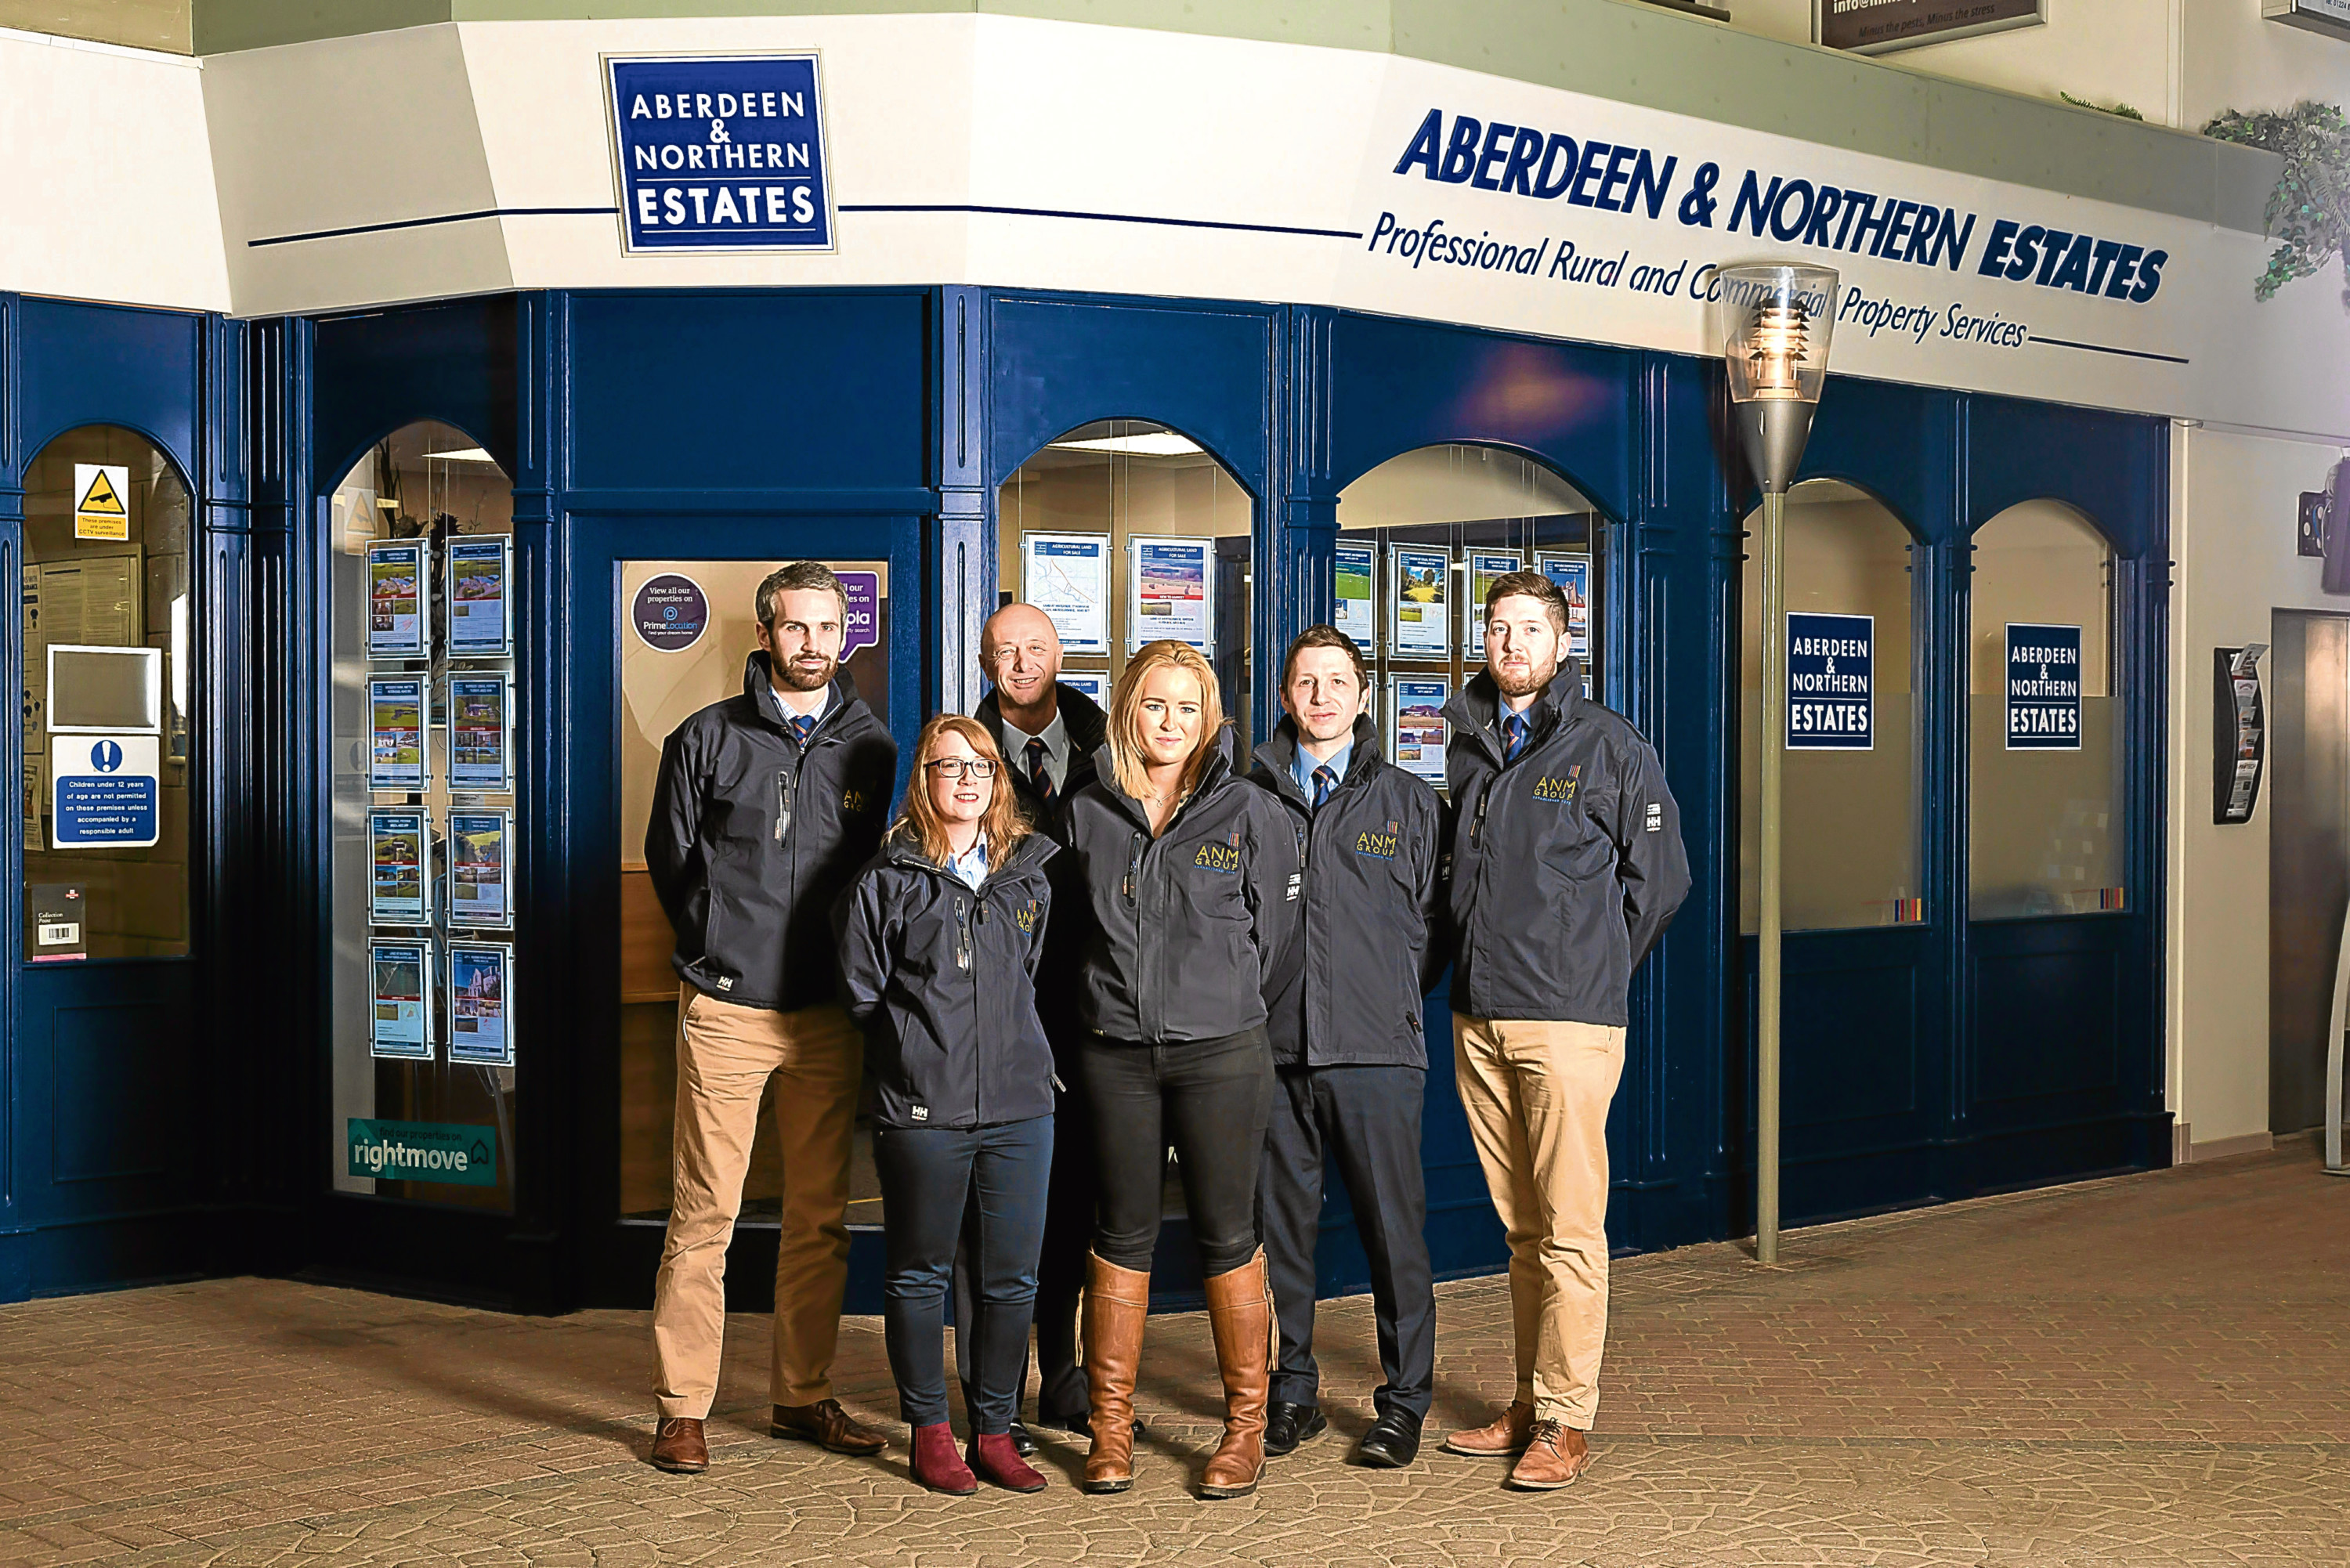 James Craig, Aileen Law, Les Reid, Cara Thomson, James Presly and Andrew MacEwan from Aberdeen and Northern Estates, ANM Group